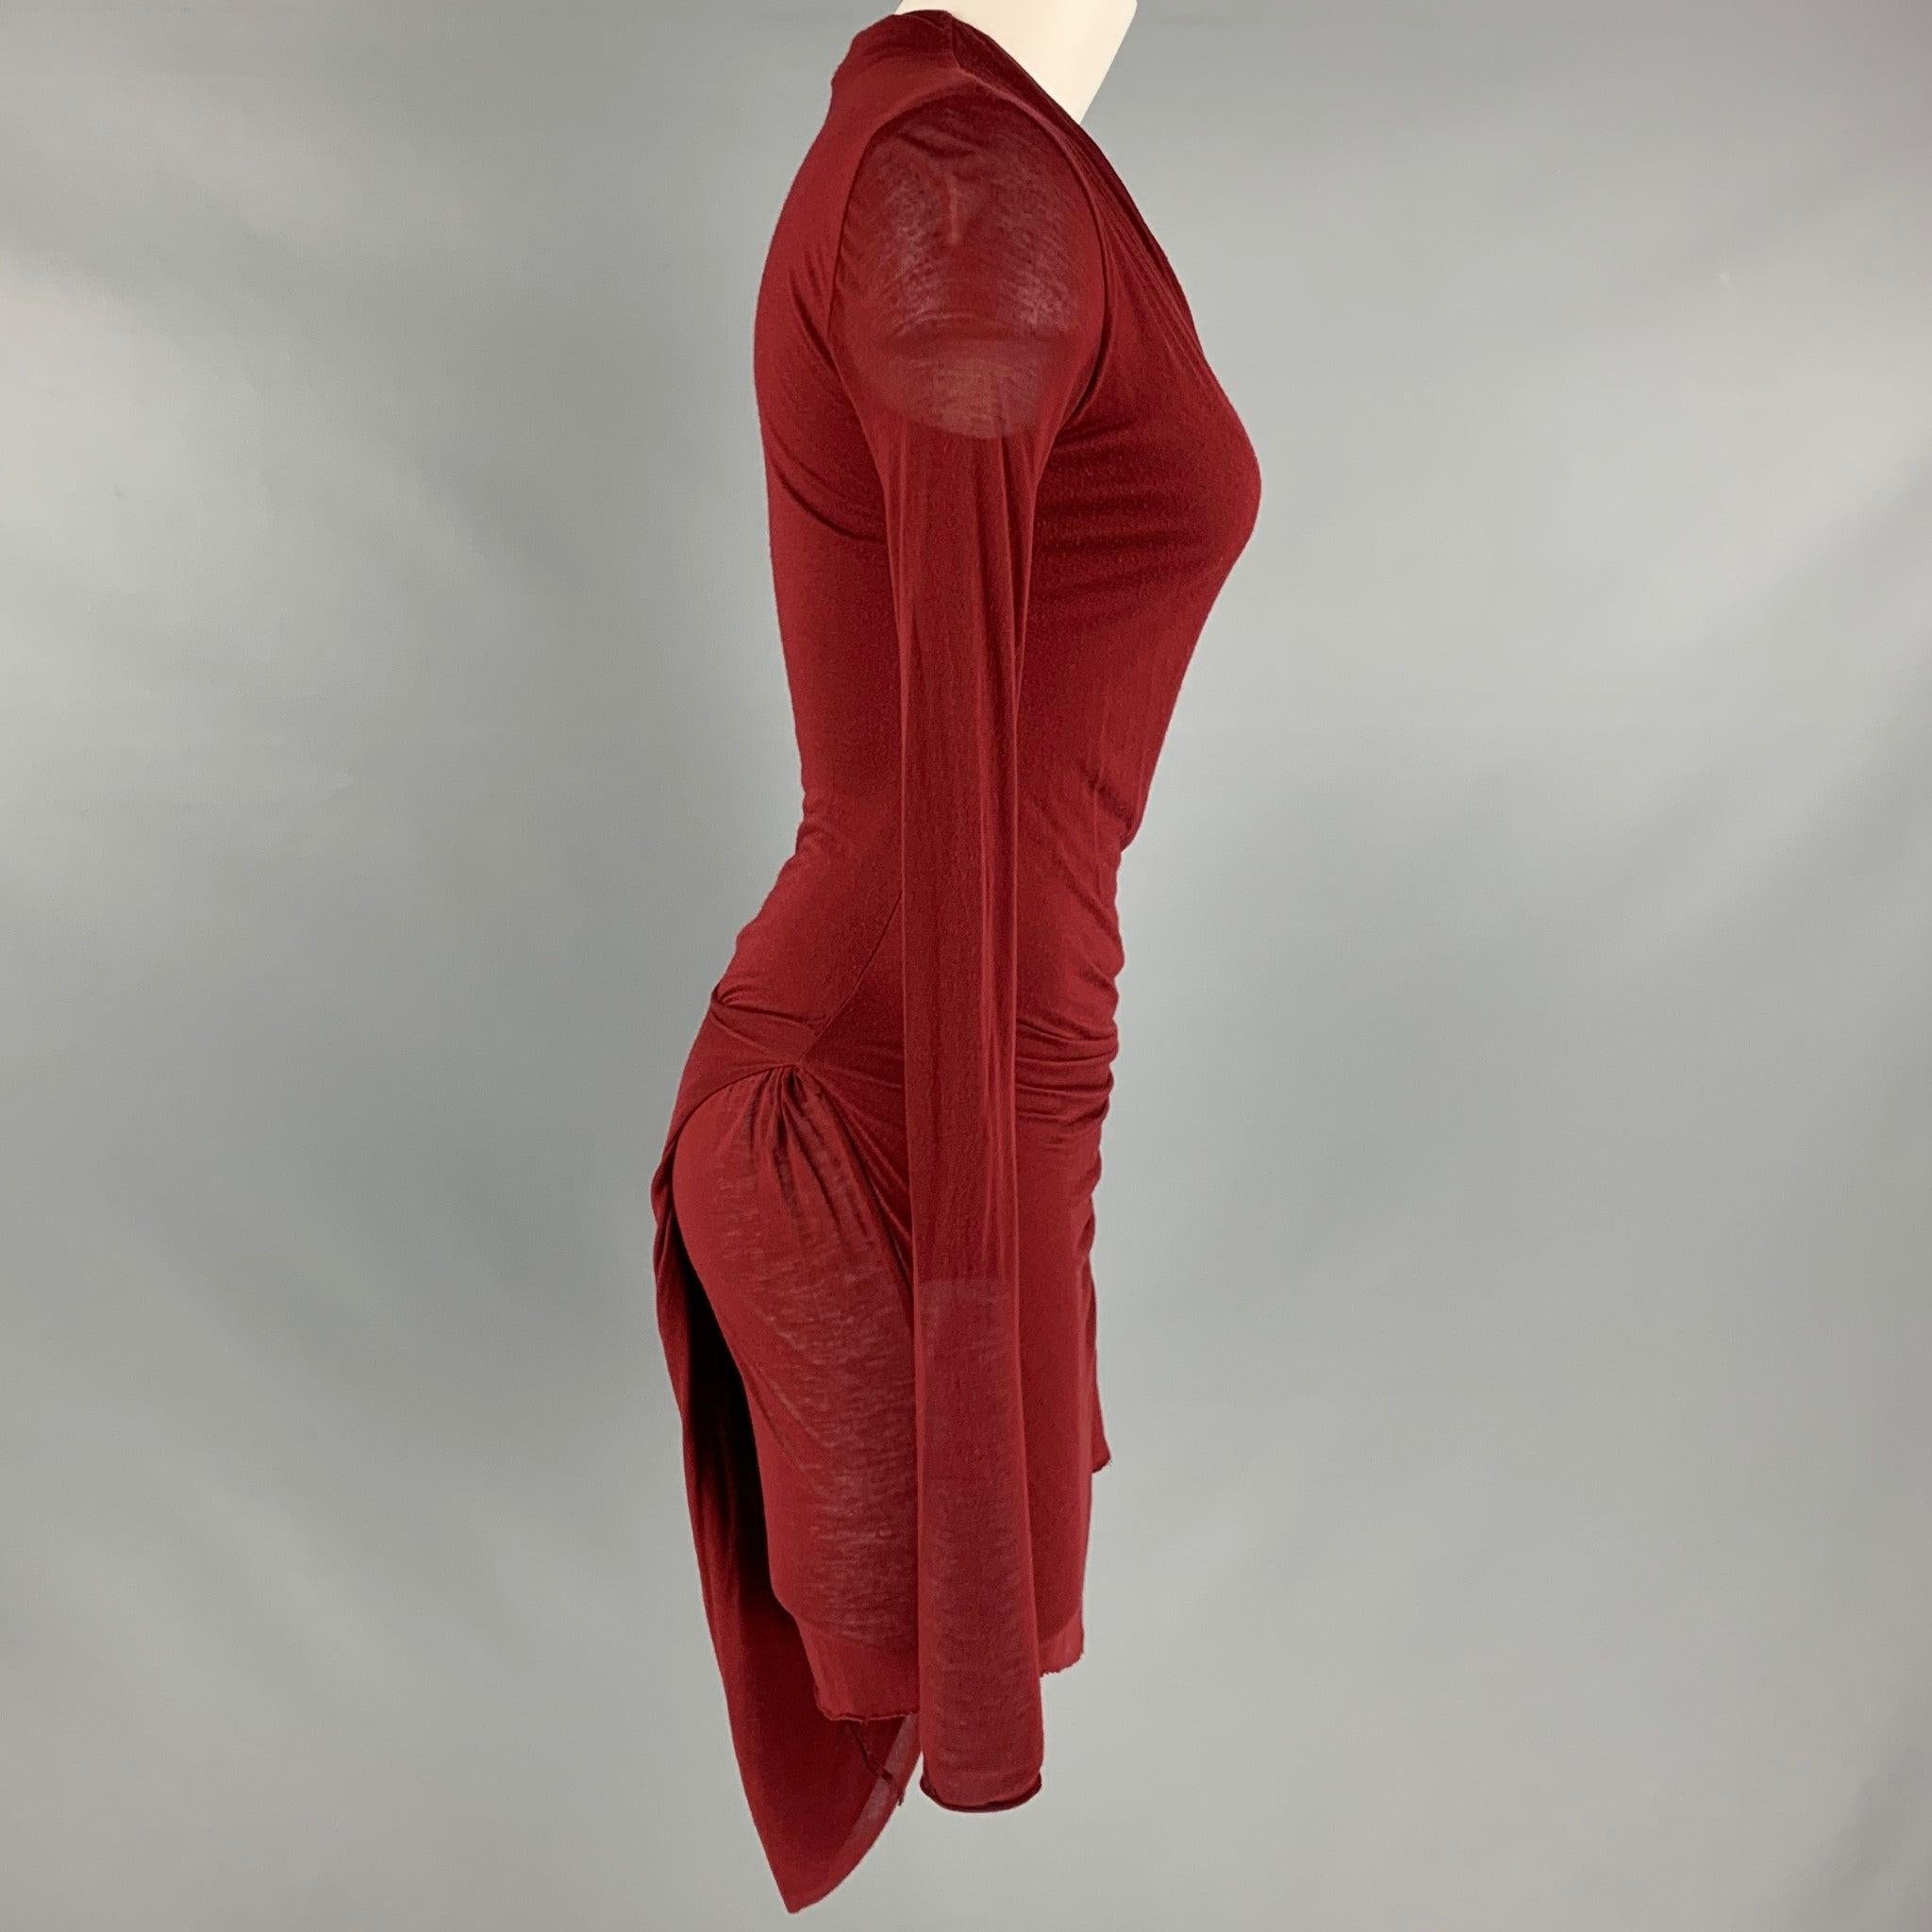 HELMUT LANG dress
in a burgundy modal fabric featuring a cowl neck, and asymmetrical style with side knot. Made in Italy.Good Pre-Owned Condition. Moderate pilling. 

Marked:  S 

Measurements: 
 
Shoulder: 17 inches Bust: 31 inches Sleeve: 29.5